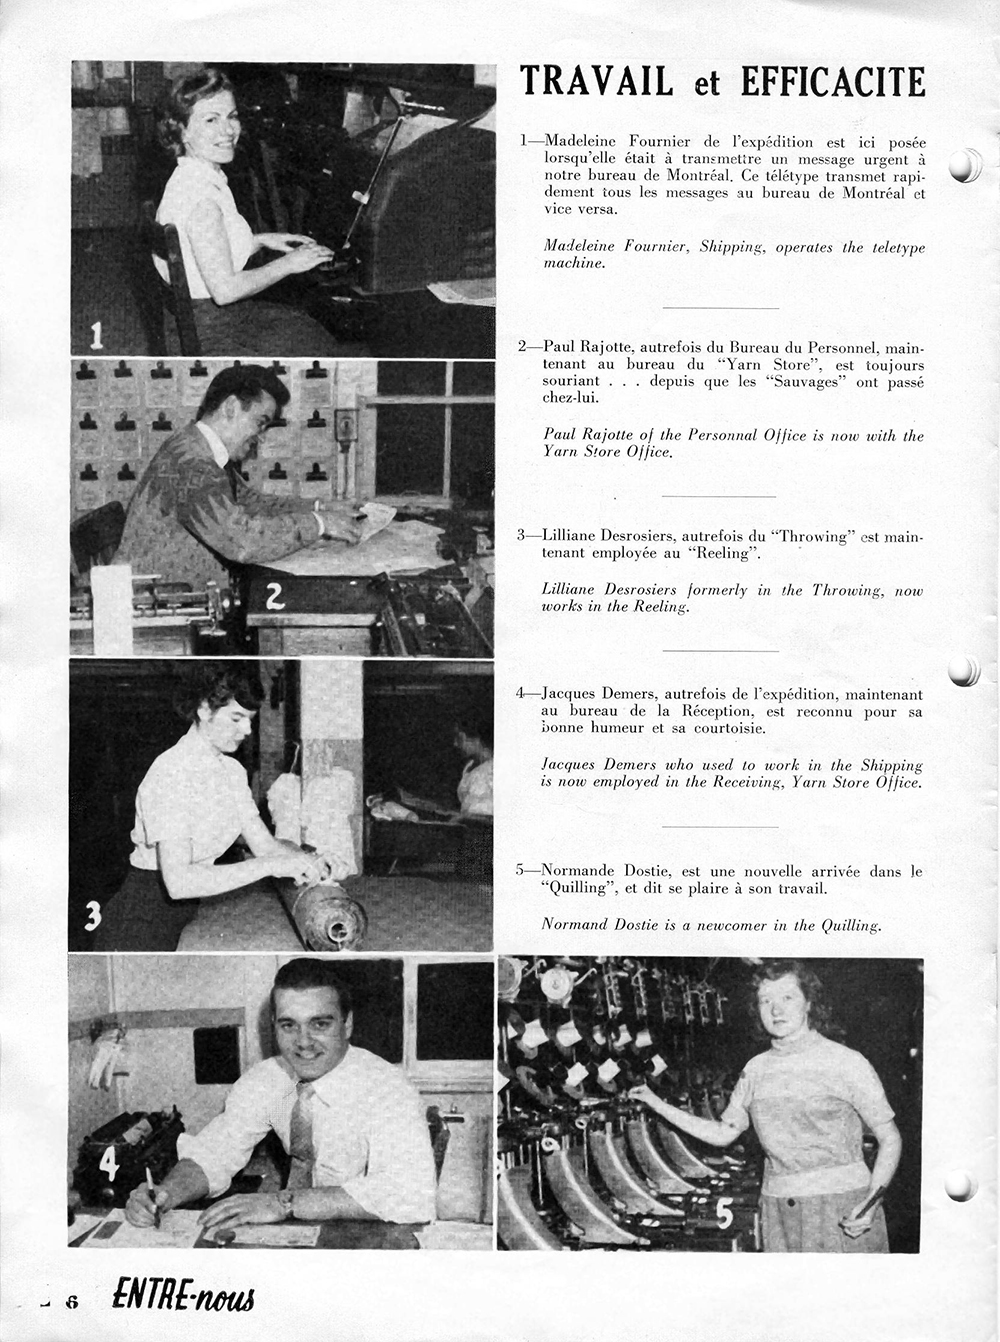 Magazine page showing workers at their workstations.